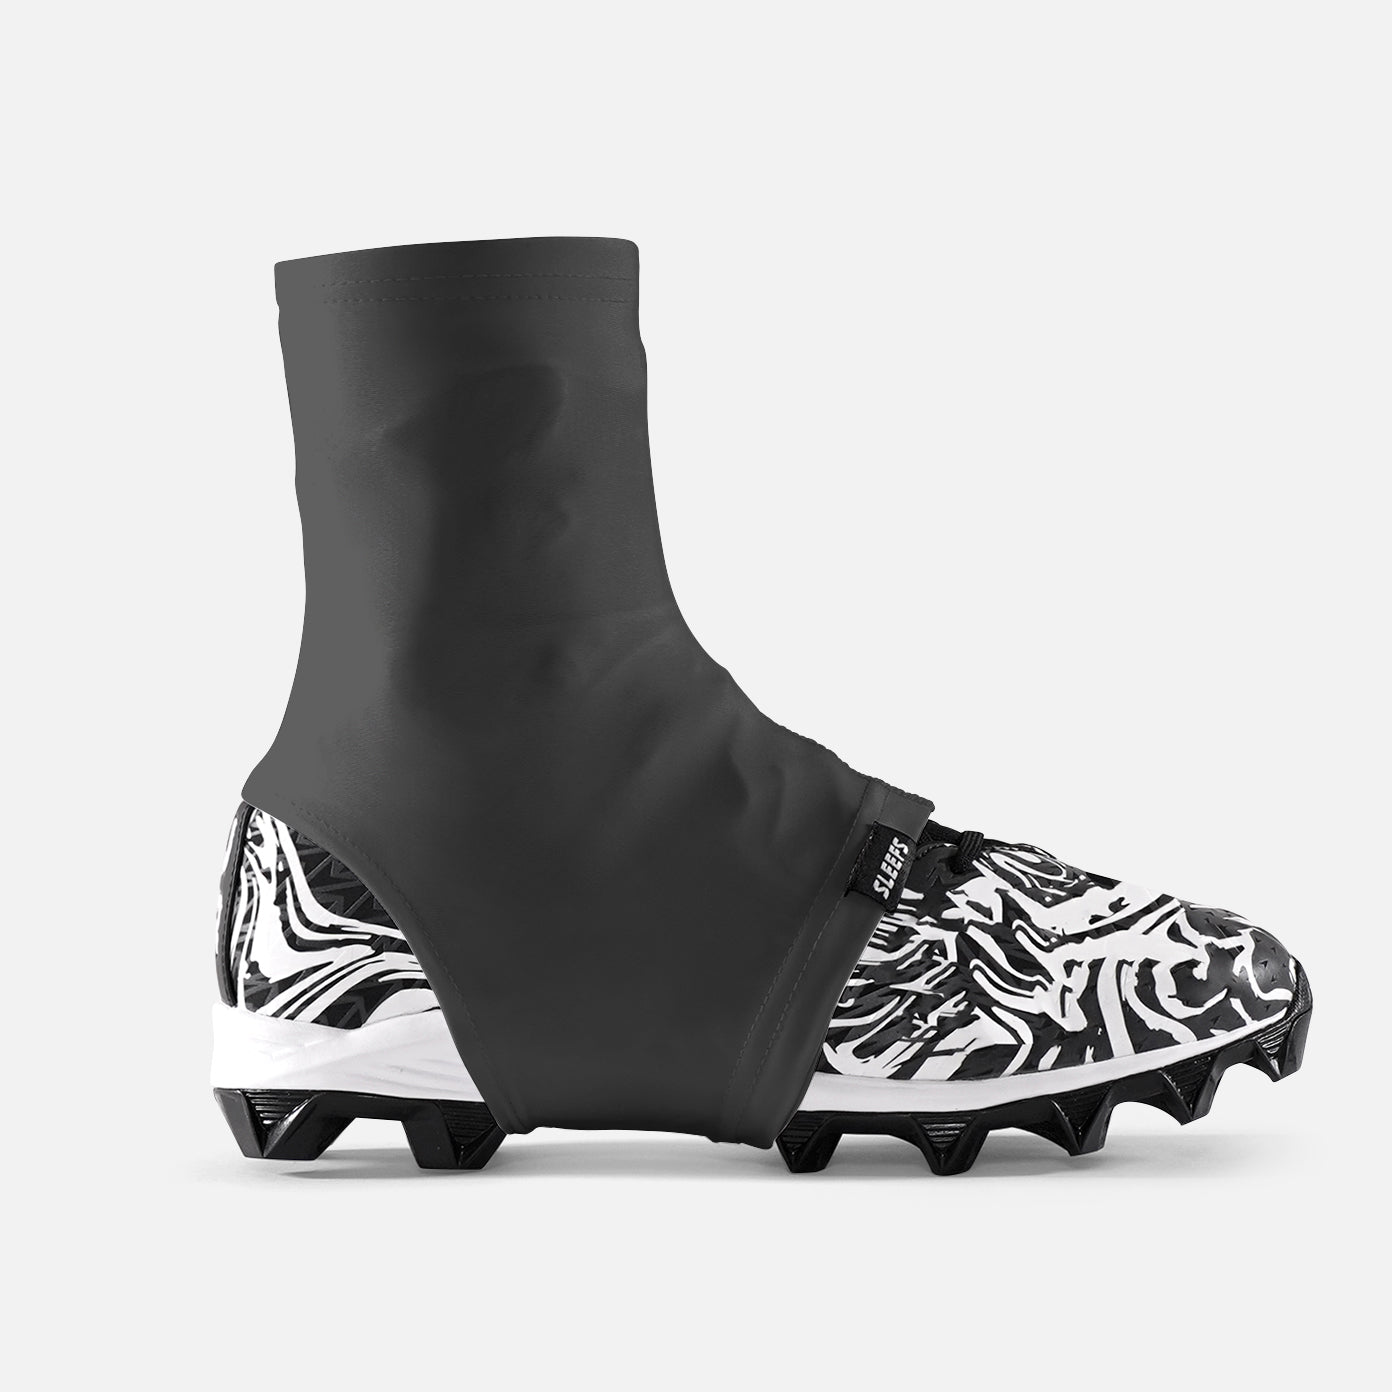 Hue Dark Gray Kids Spats / Cleat Covers